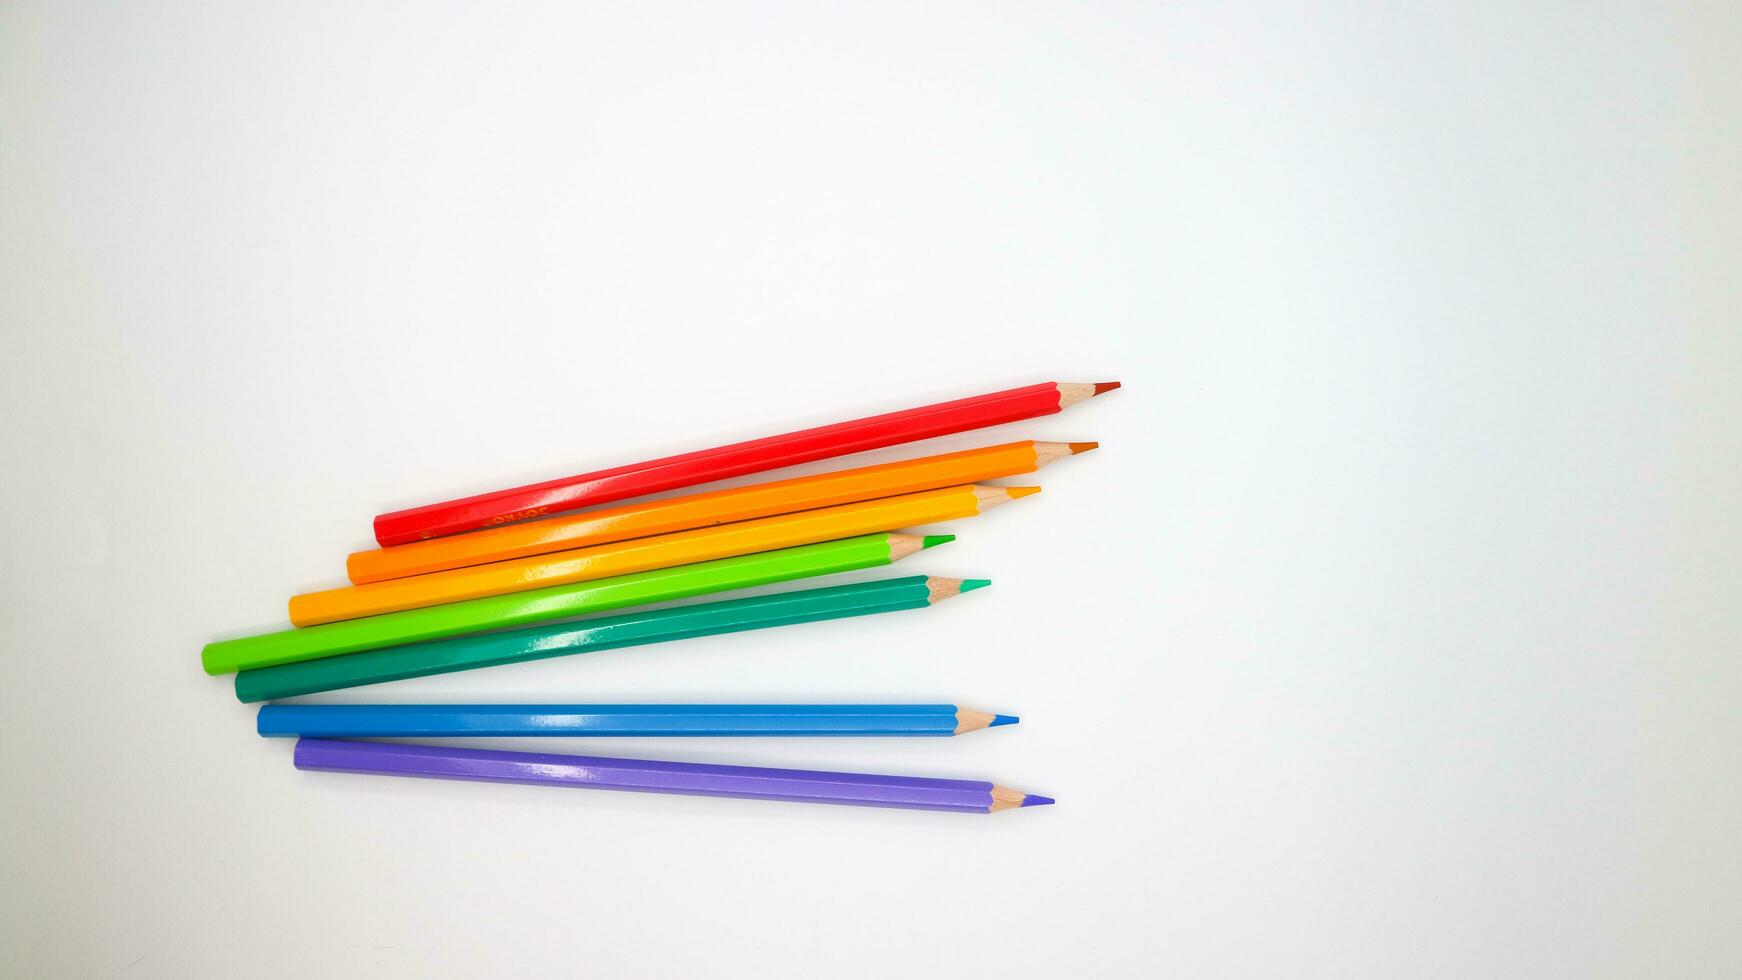 colored pencils in row on a white background top view. photo